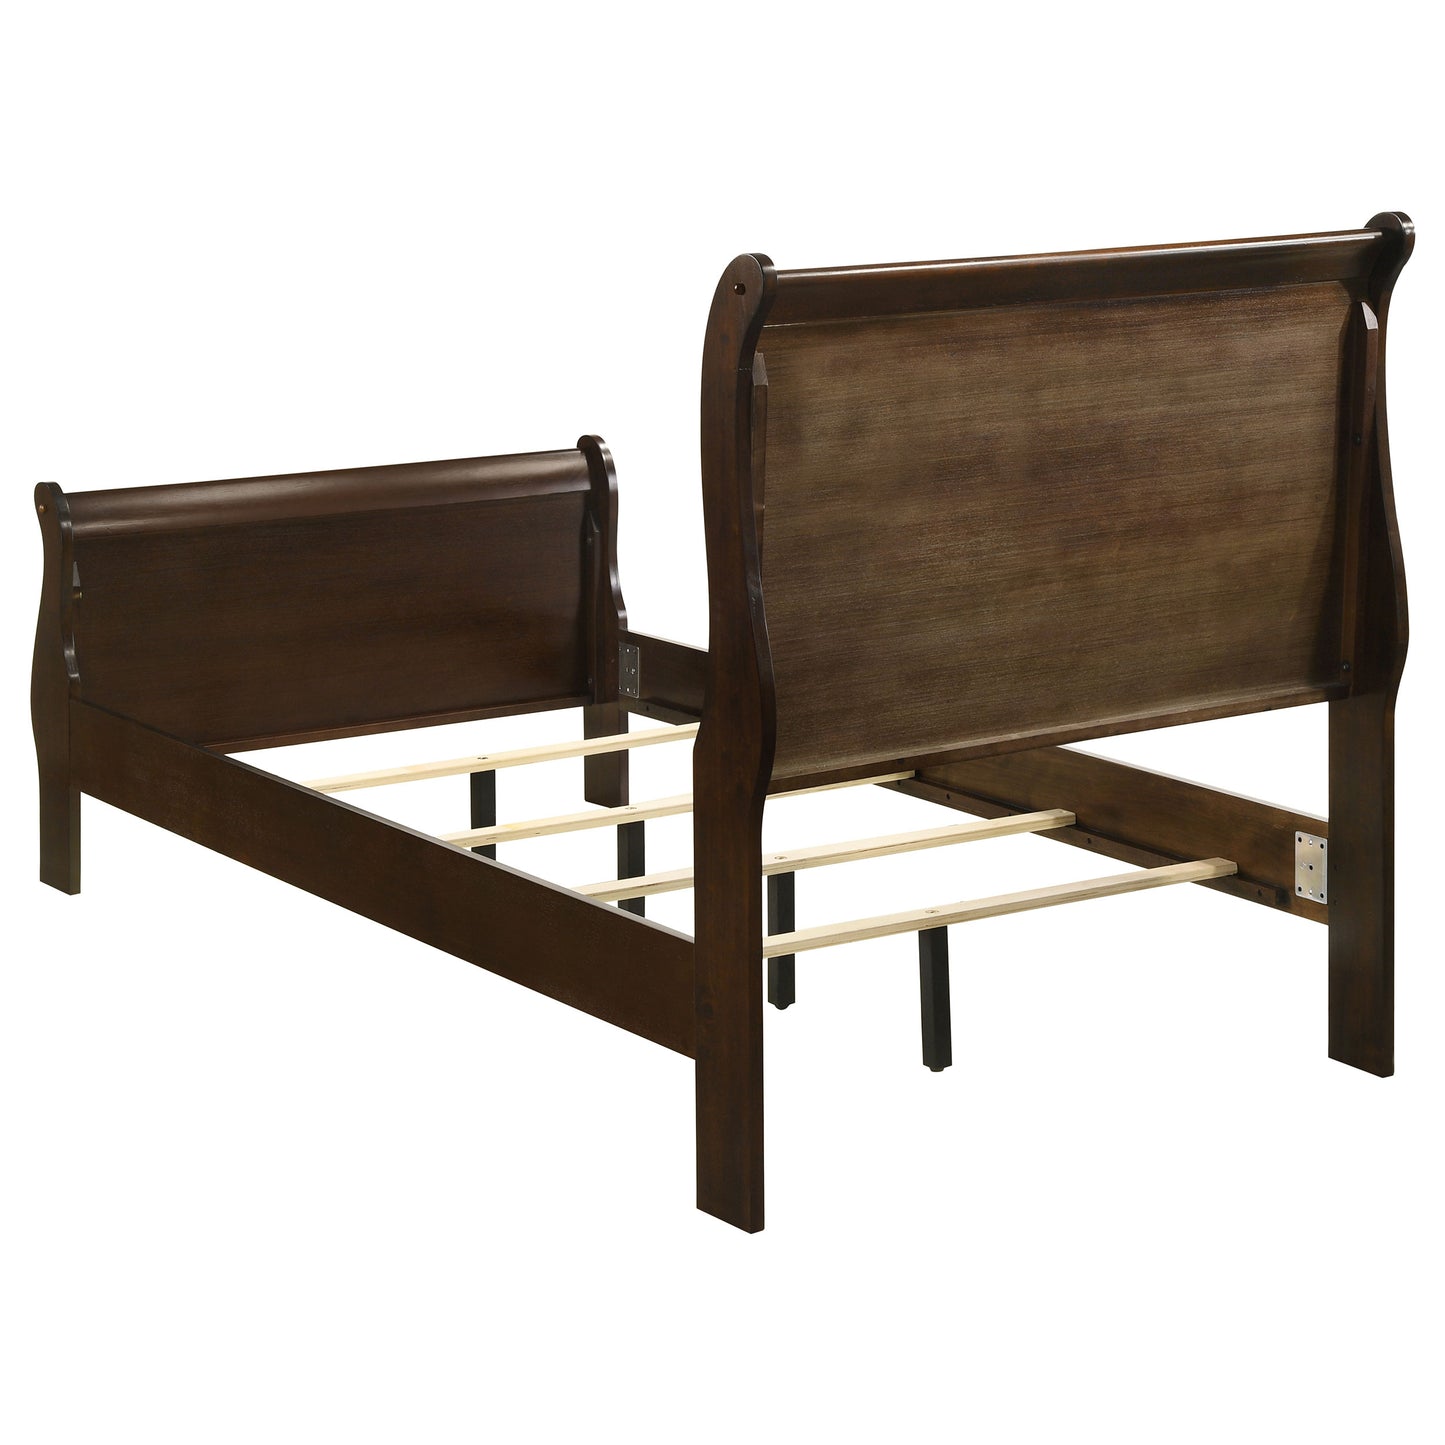 Louis Philippe Wood Twin Sleigh Bed Cappuccino